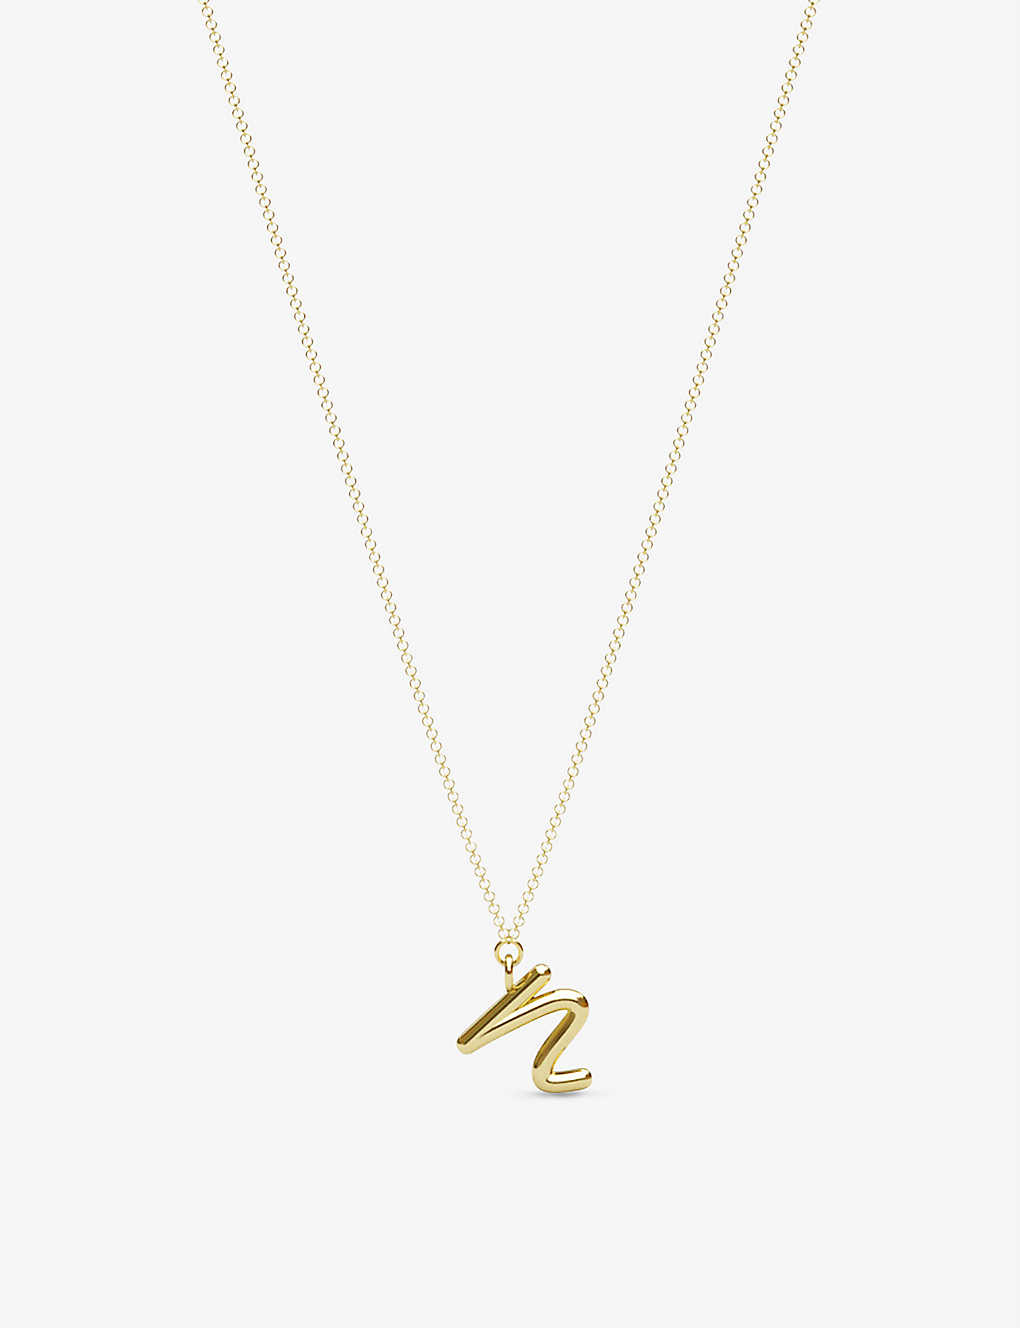 THE ALKEMISTRY THE ALKEMISTRY WOMENS 18CT YELLOW GOLD LOVE LETTER N INITIAL 18CT YELLOW-GOLD PENDANT NECKLACE,51774869